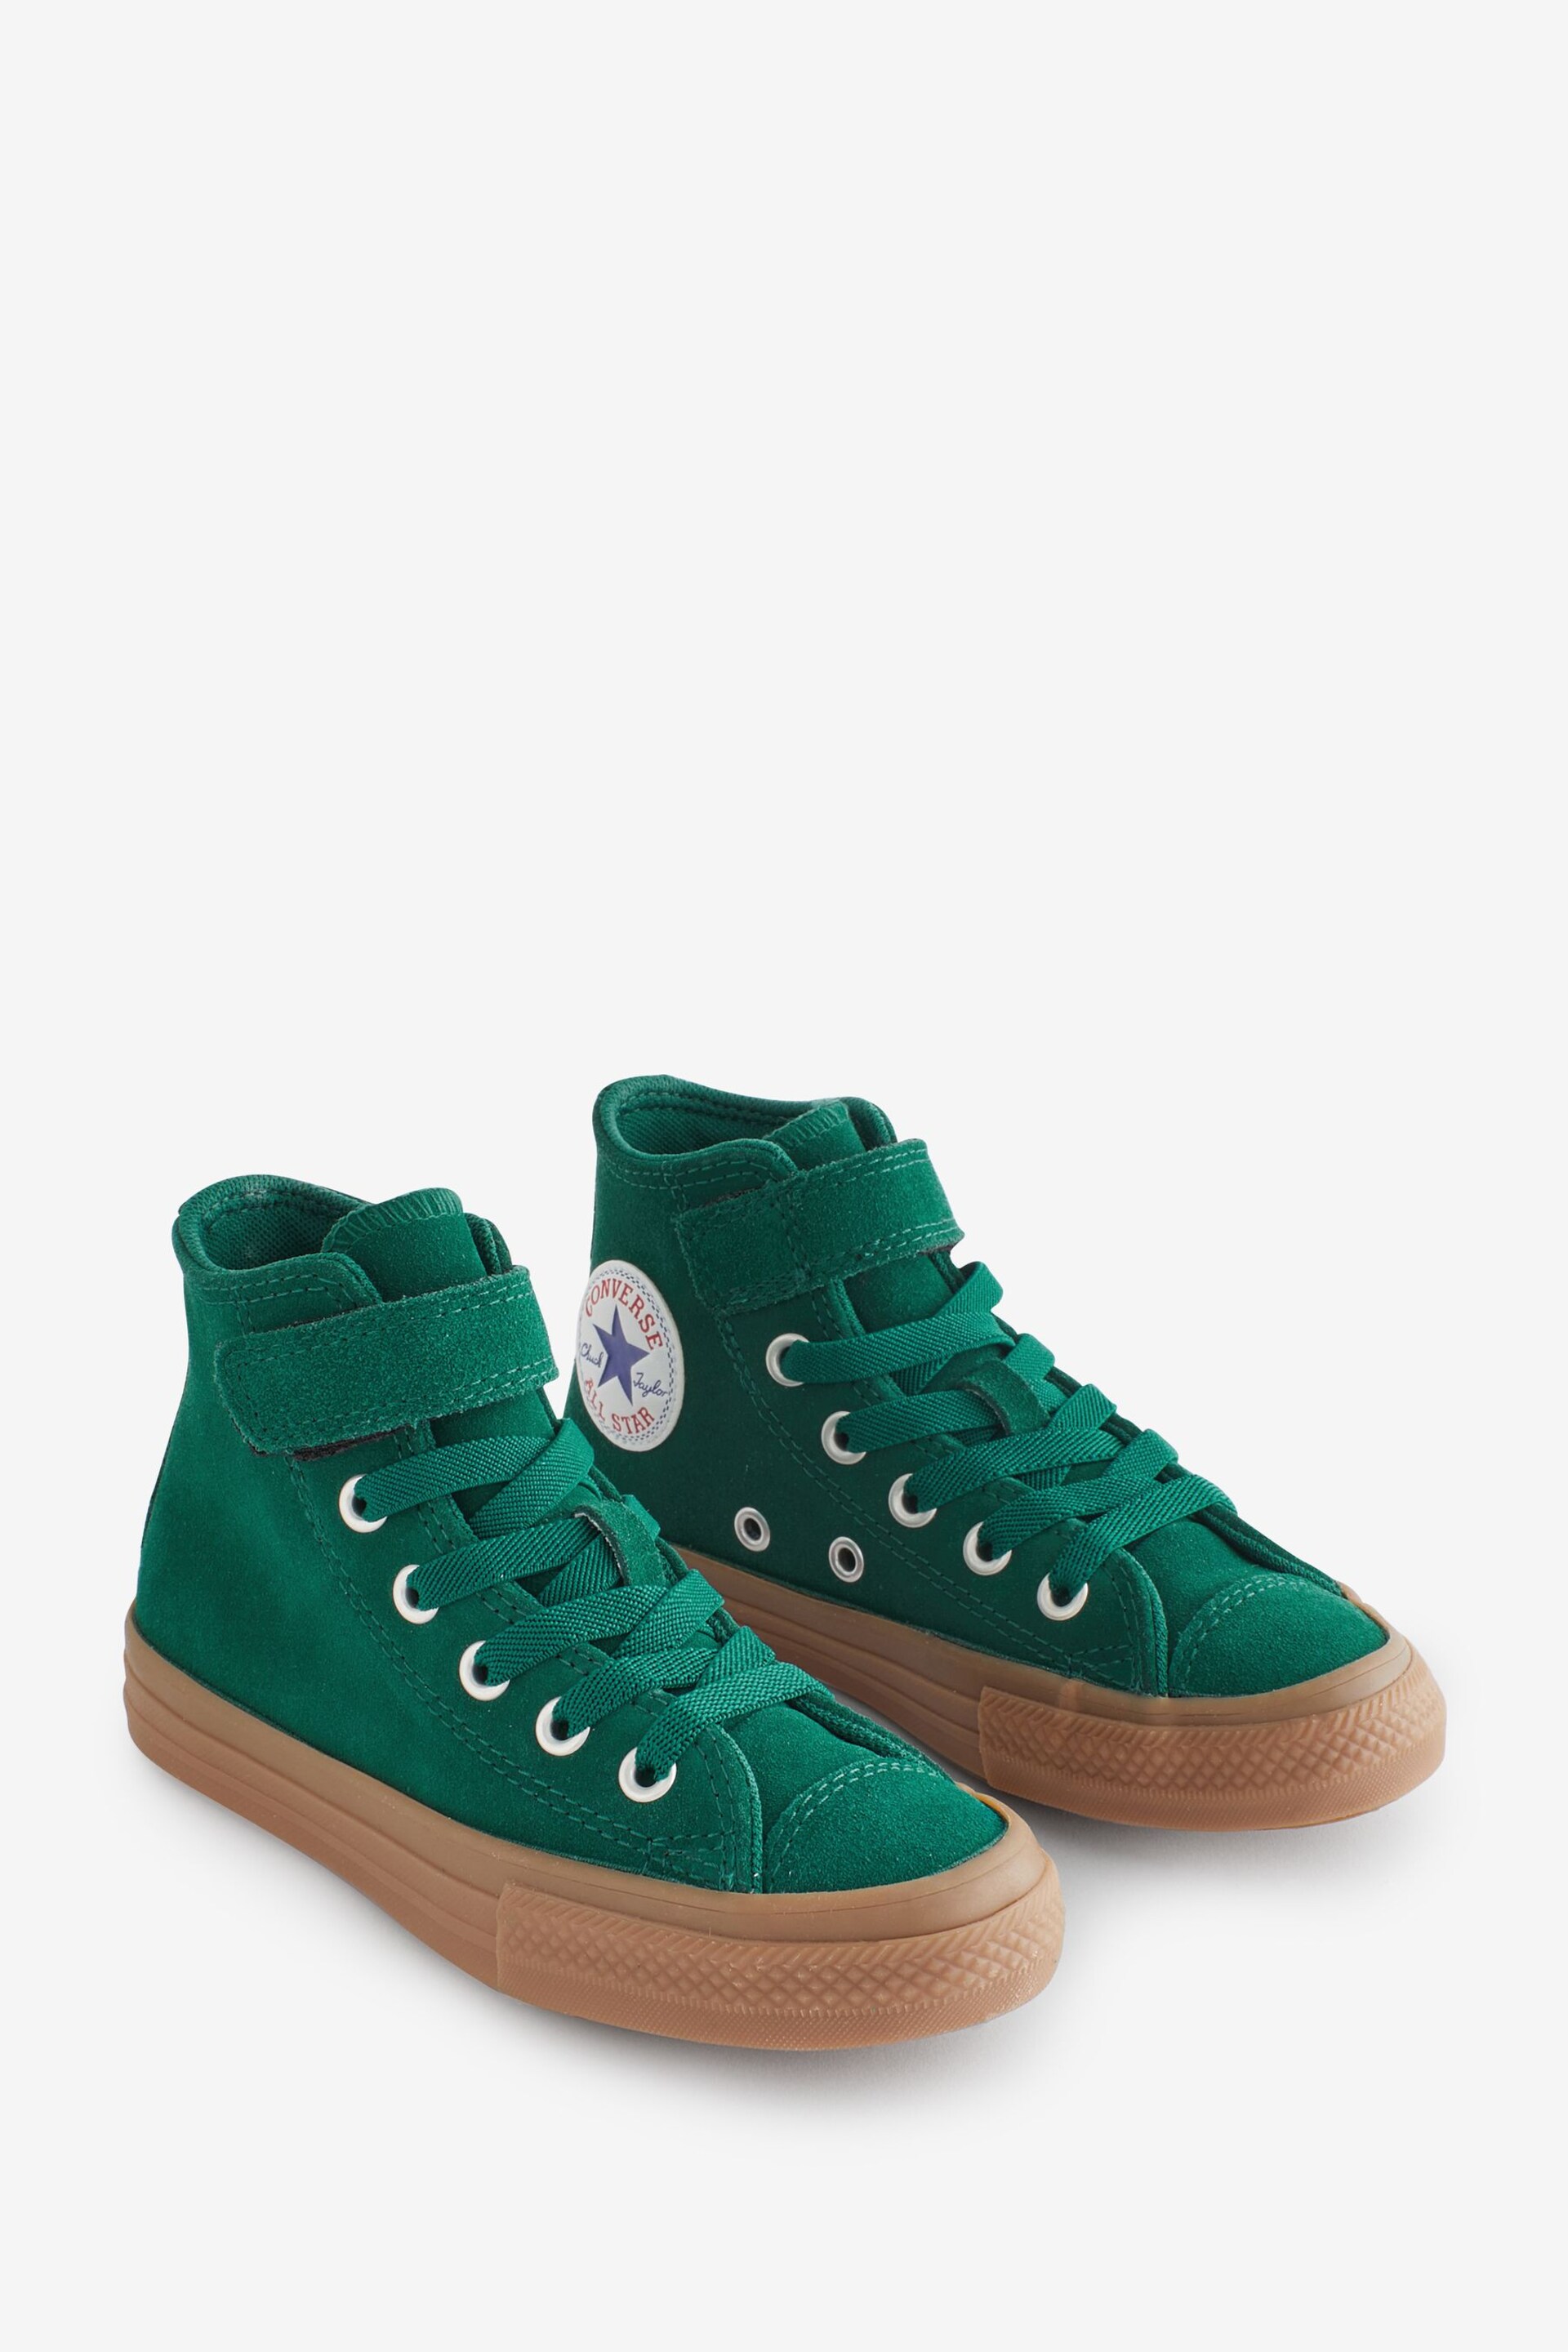 Converse Green Chuck Taylor All Star 1V Junior Trainers - Image 3 of 9